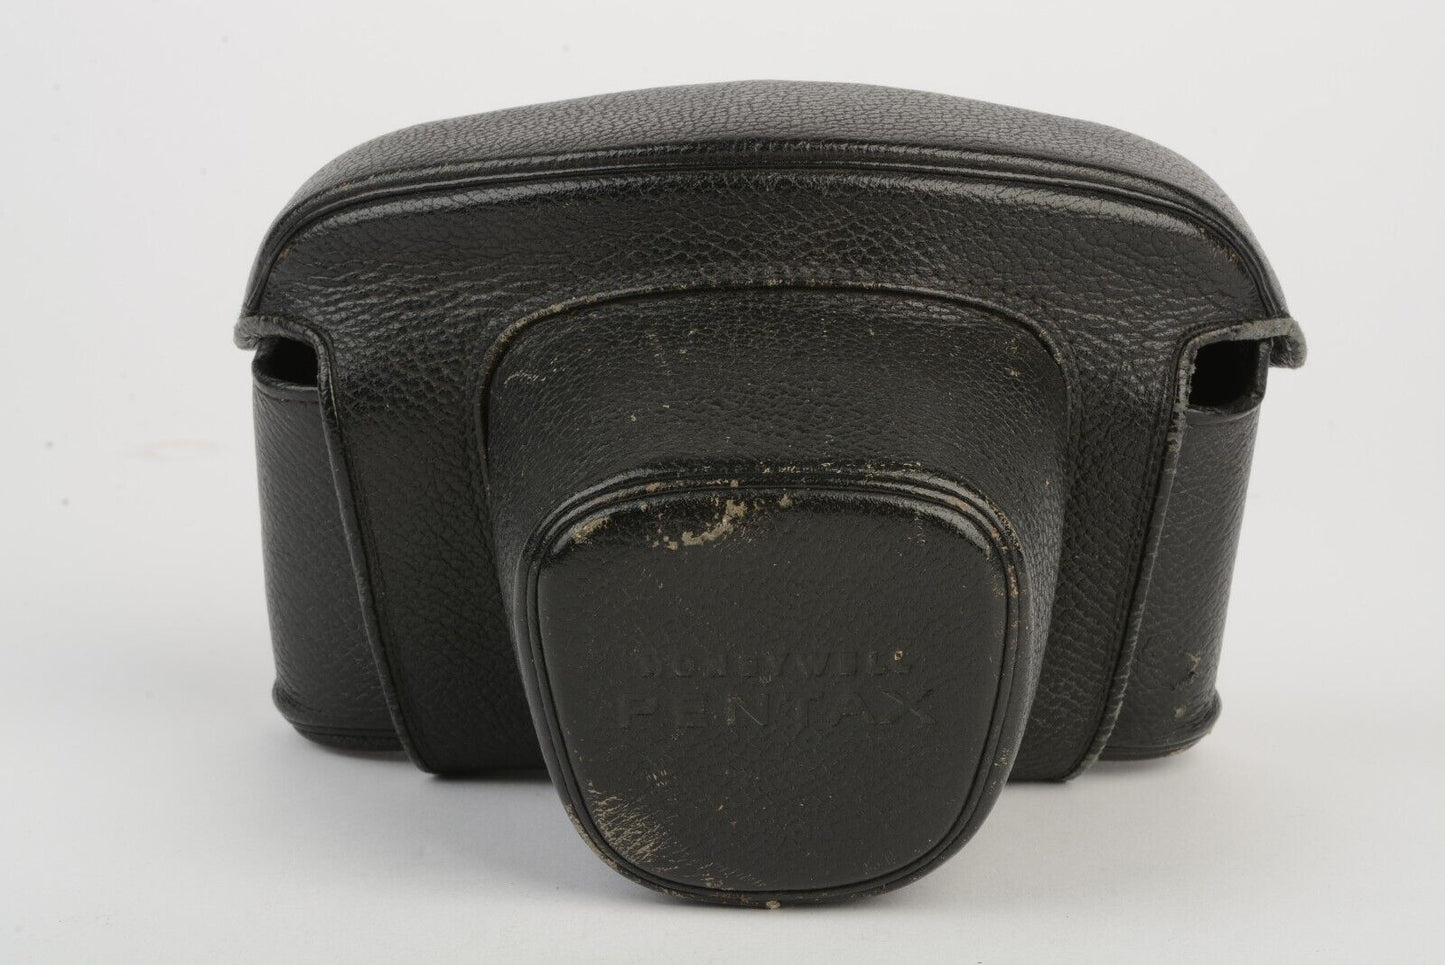 EXC+ GENUINE PENTAX SPOTMATIC EVEREADY LEATHER CASE, GOOD CONDITION